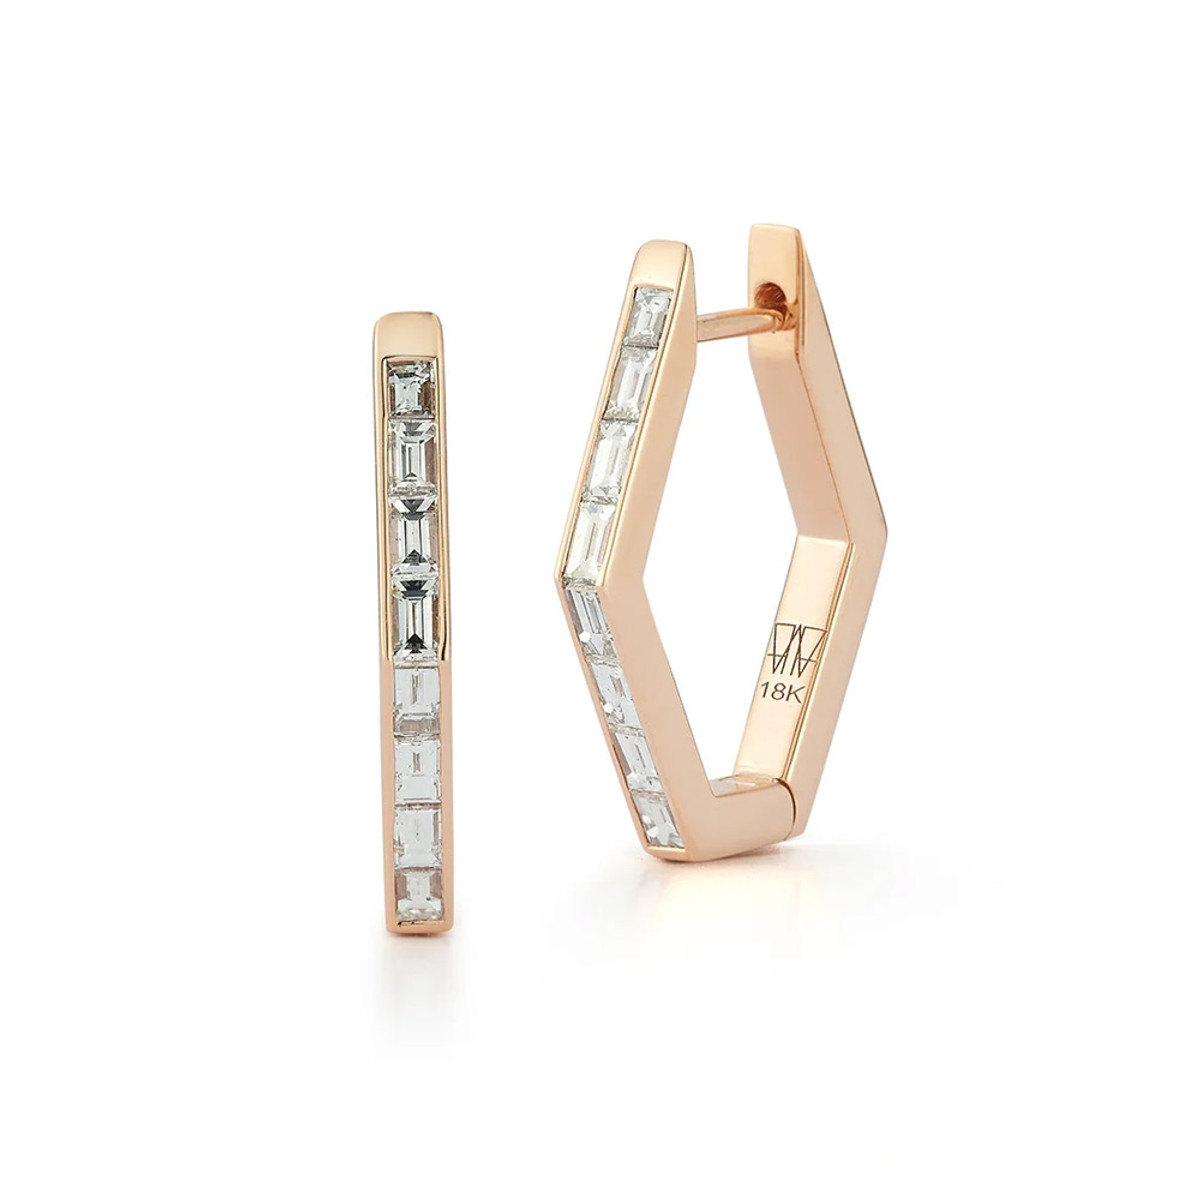 Walters Faith Quentin 18K Rose Gold and Baguette Diamond Hexagon Hoop Earrings-56959 Product Image